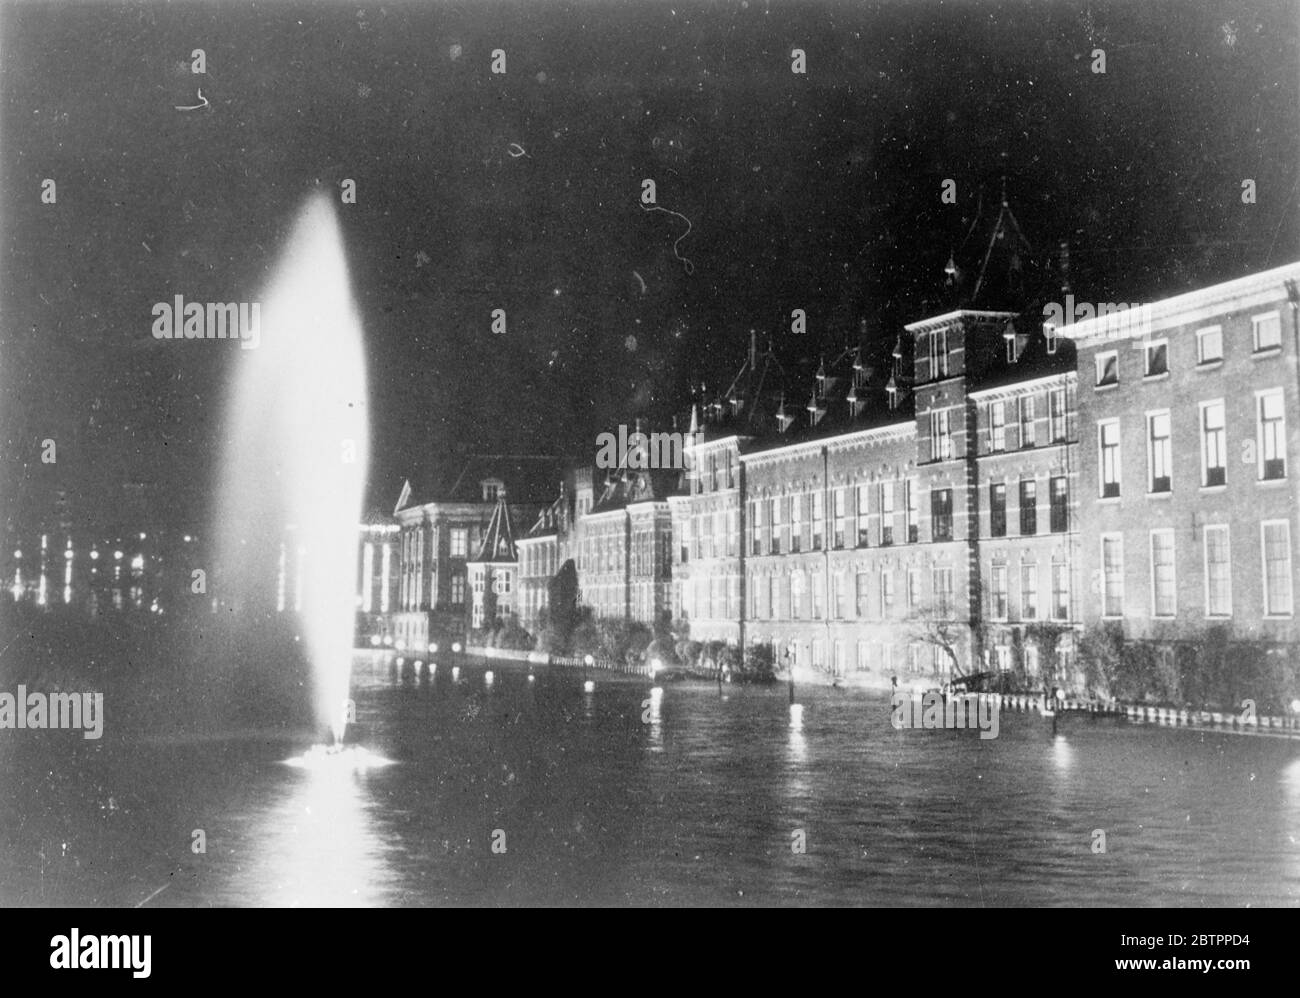 Floodlights welcome Holland's new Princess. Holland's new Princess, born to Princess Juliana has been welcomed with a blaze of light. All the important buildings in the country's chief cities of flood lighted. Photo shows, floodlit government buildings at the Hague, the Dutch capital. 1 February 1938 Stock Photo